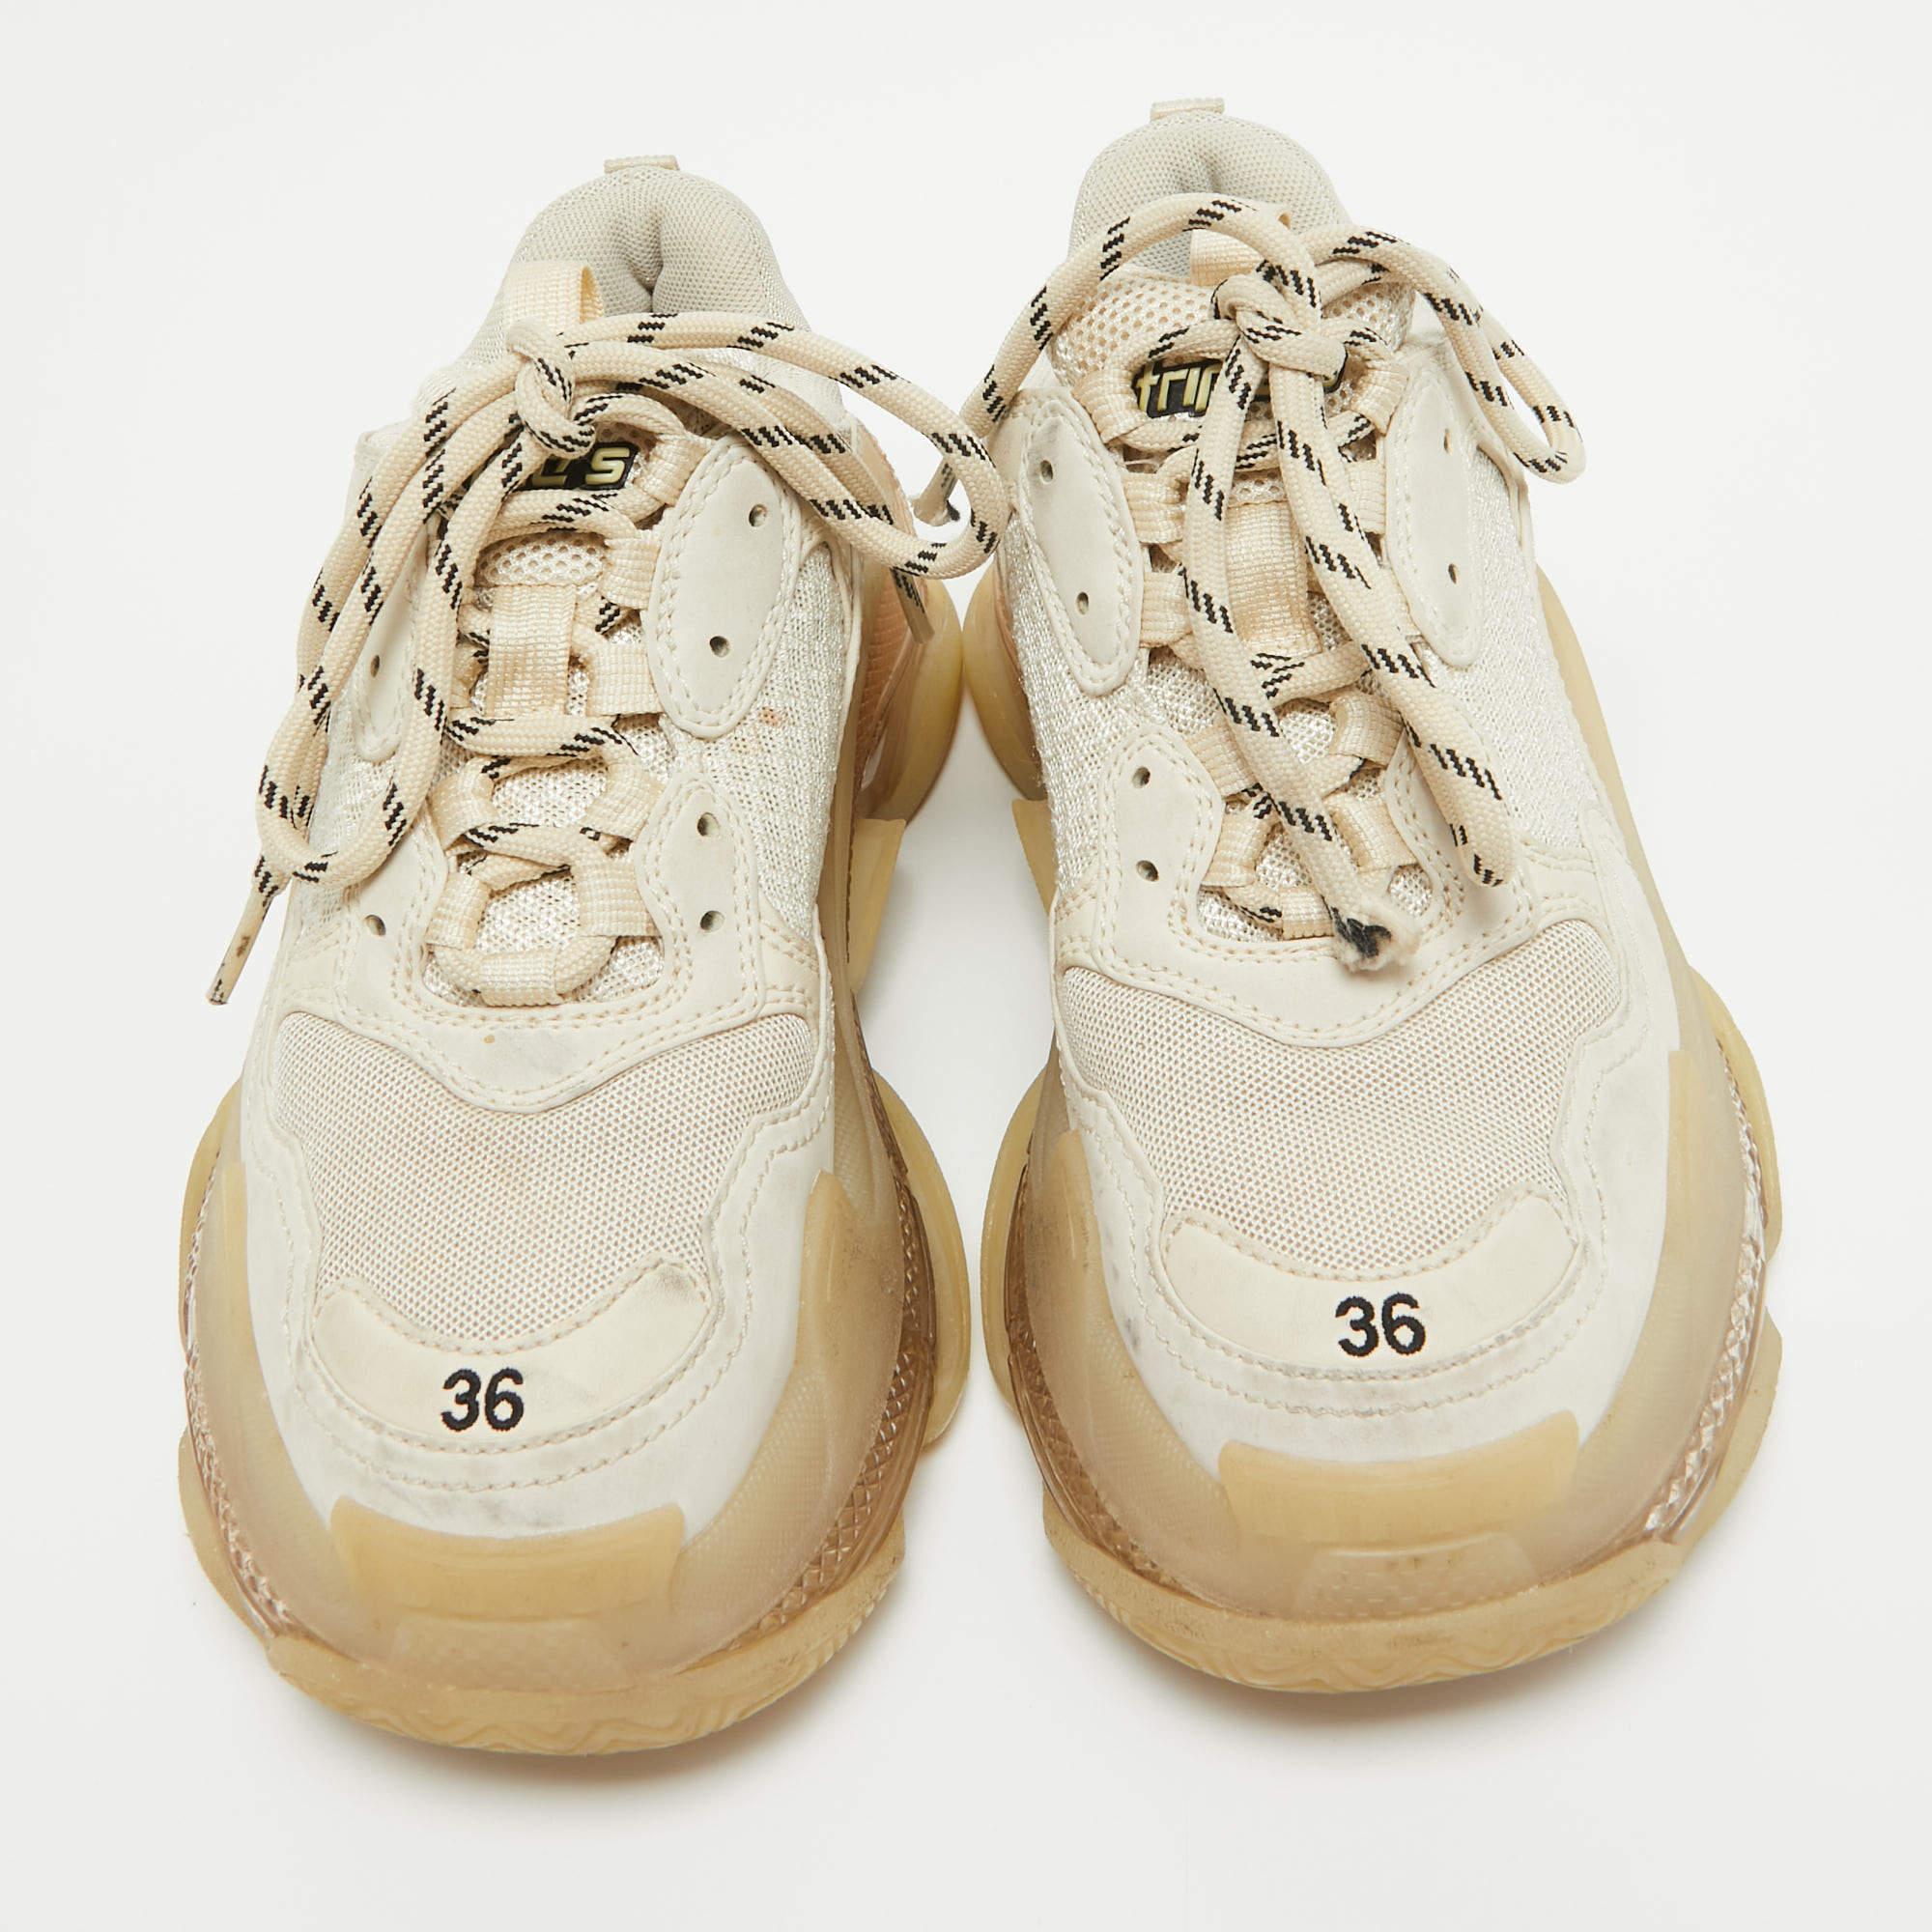 Upgrade your style with these Balenciaga Triple S sneakers. Meticulously designed for fashion and comfort, they're the ideal choice for a trendy and comfortable stride.

Includes: Original Dustbag

